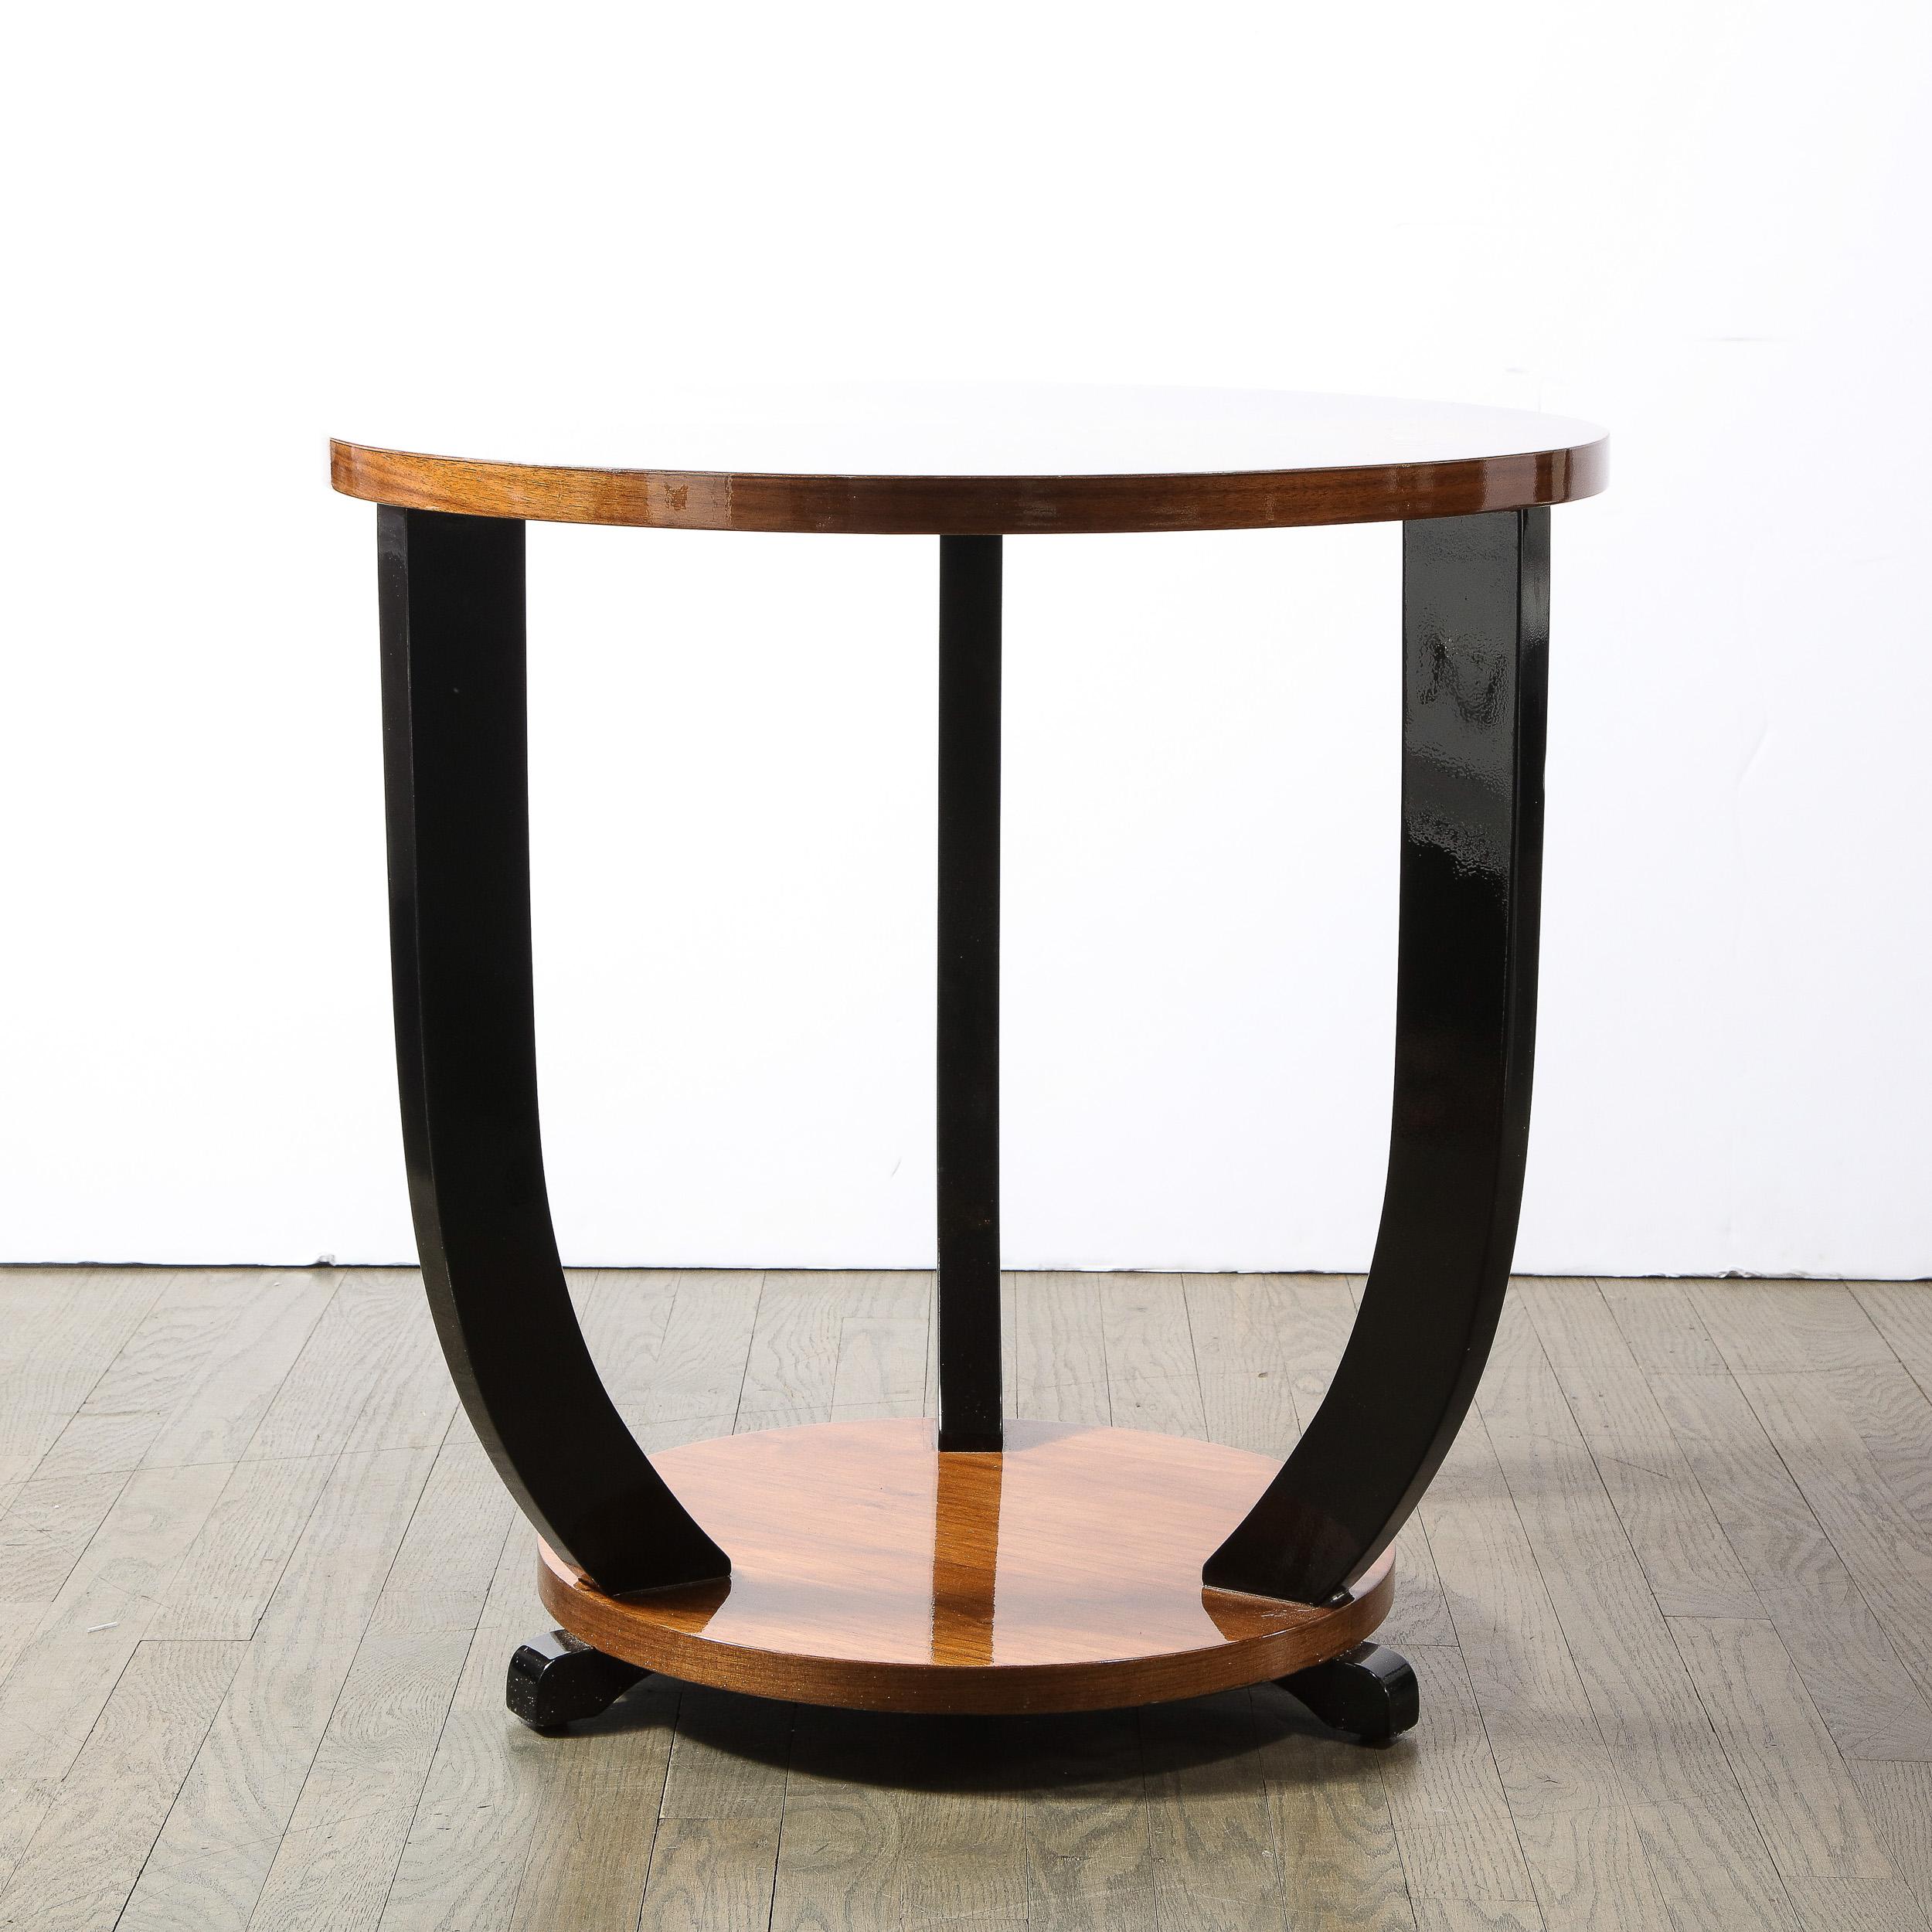 French Art Deco Two-Tiered Bookmatched Walnut & Black Lacquer Gueridon Table For Sale 8